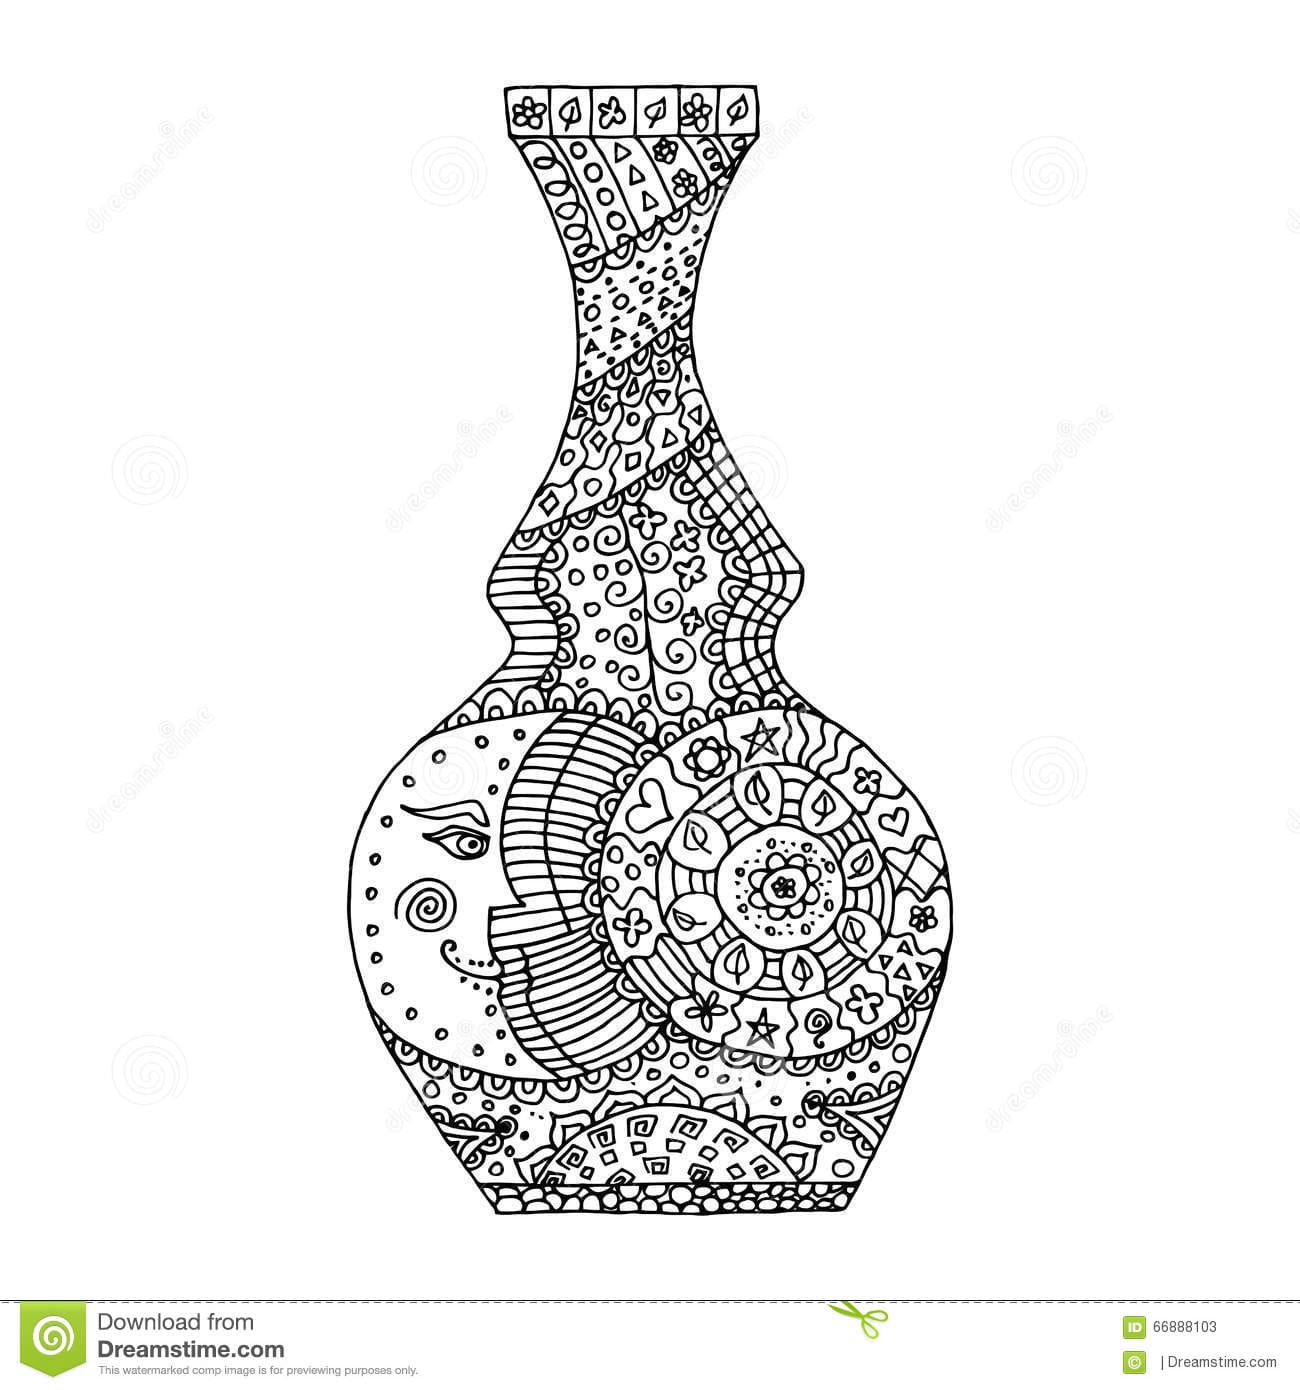 Vase Image For Kids Coloring Page